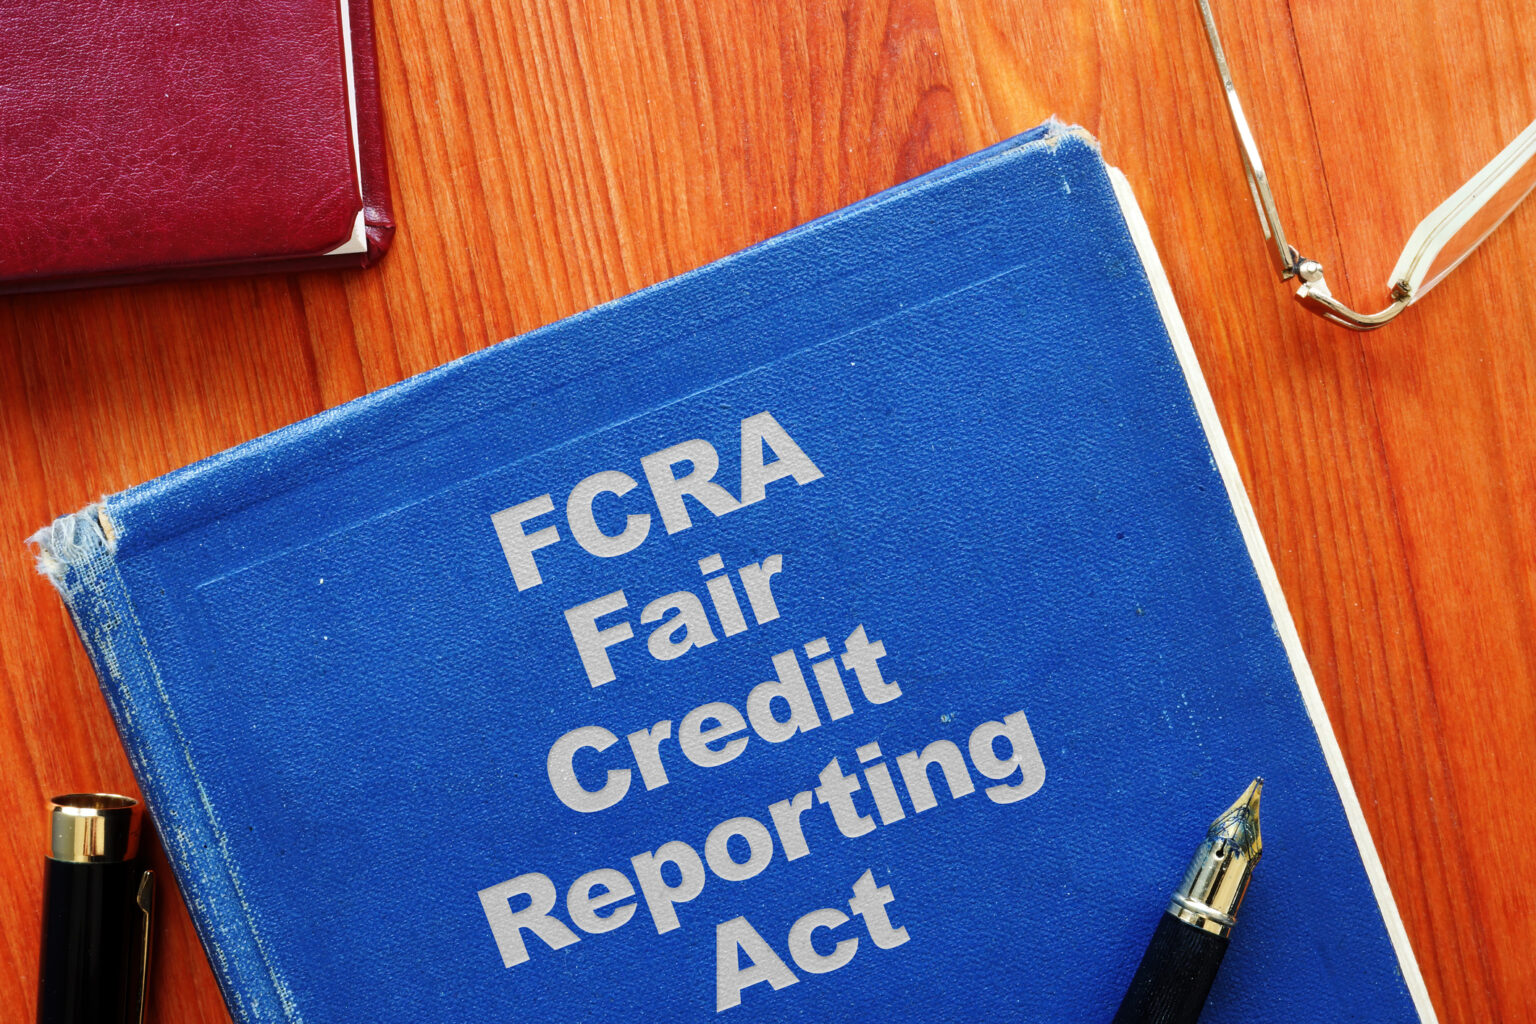 Who are the Credit Reporting Agencies? Consumers Law